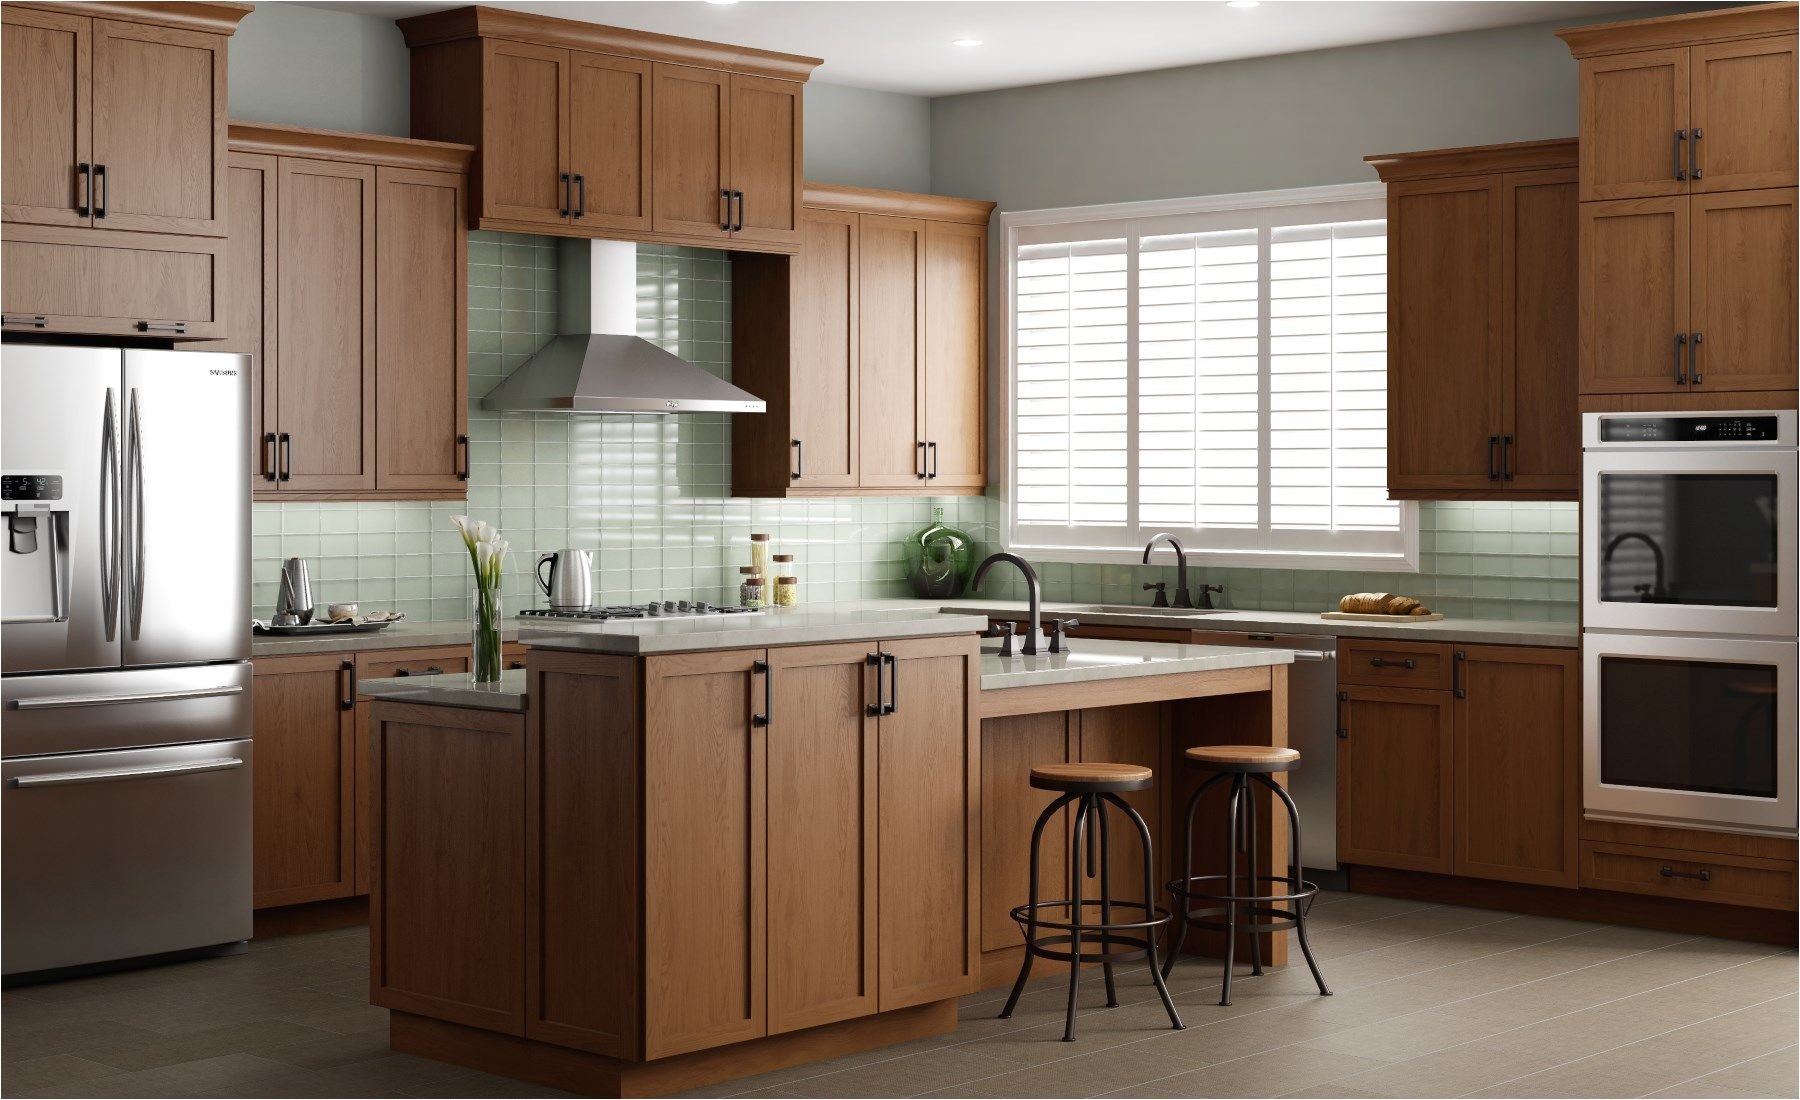 hampton bay cabinets reviews quality and sizes